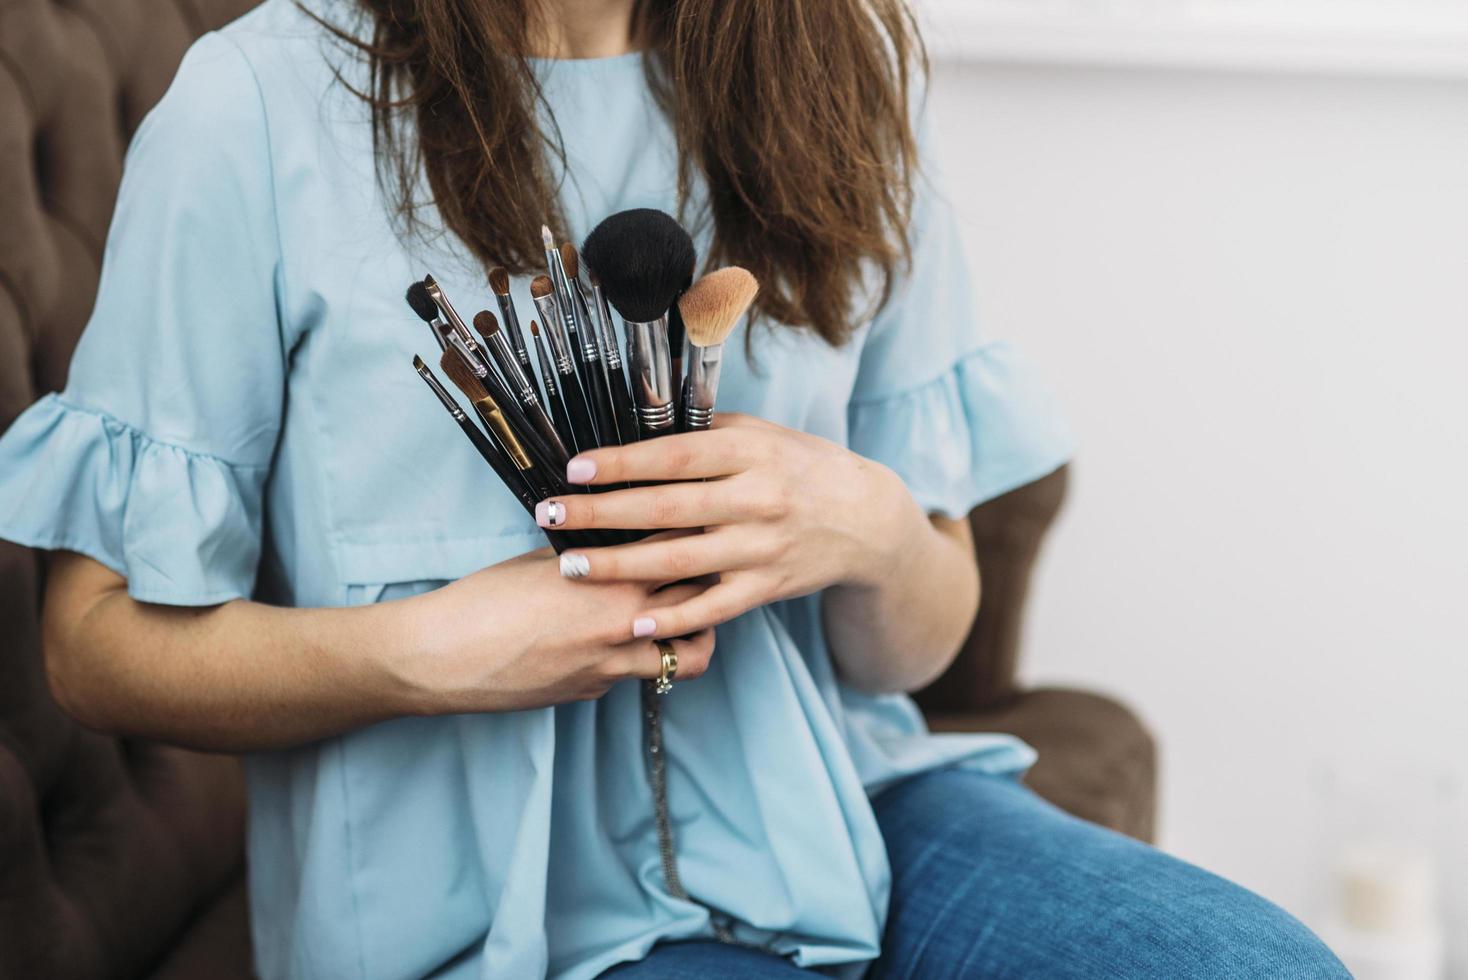 Woman holding makeup brushes photo